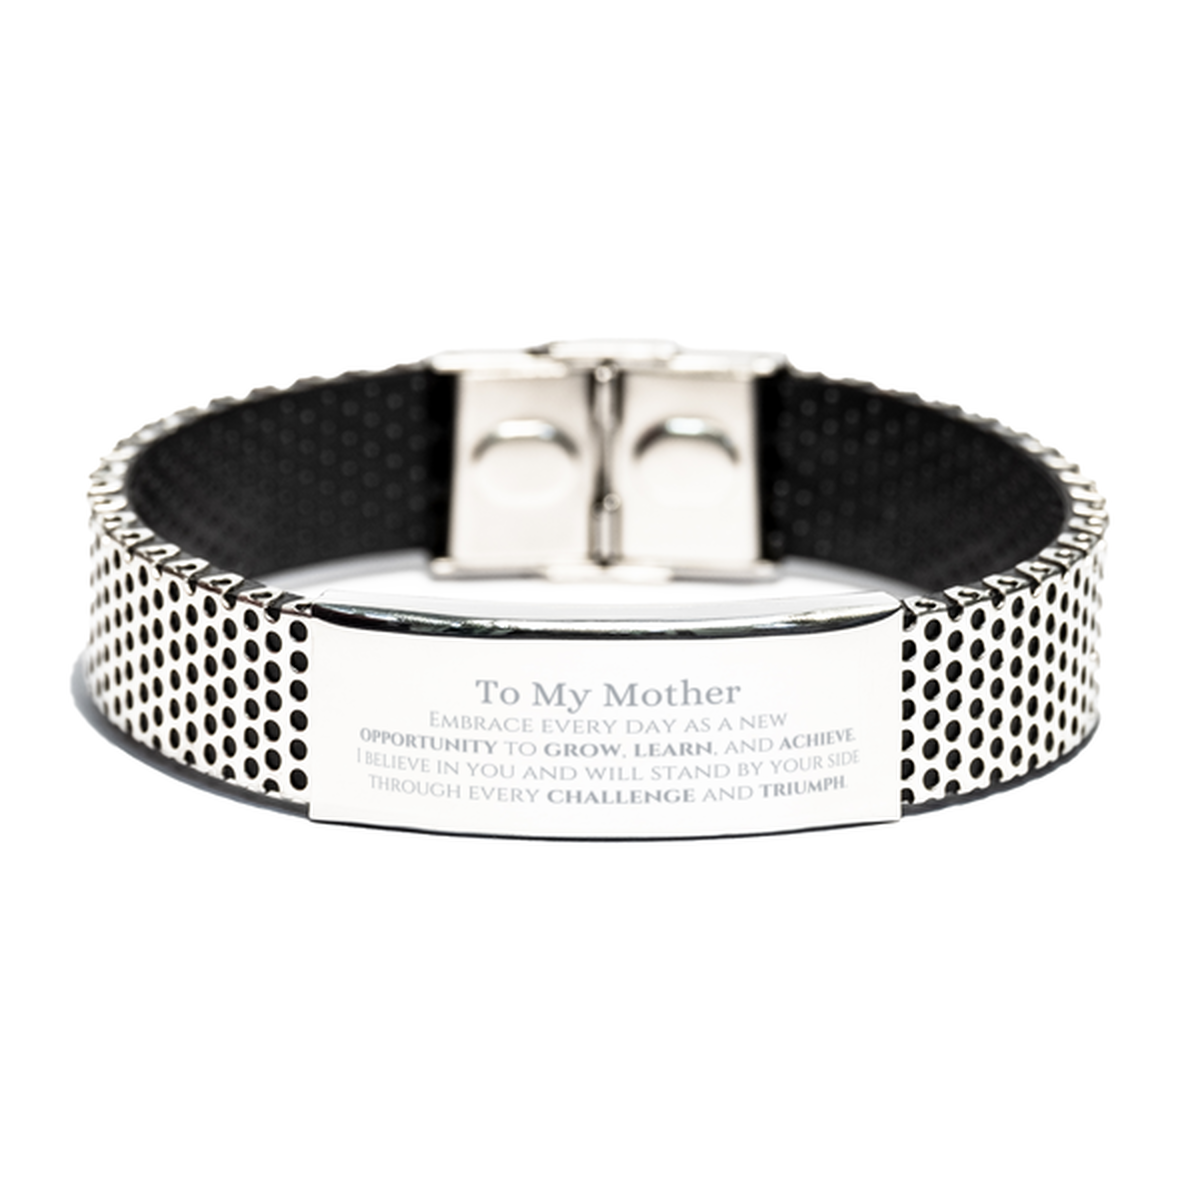 To My Mother Gifts, I believe in you and will stand by your side, Inspirational Stainless Steel Bracelet For Mother, Birthday Christmas Motivational Mother Gifts